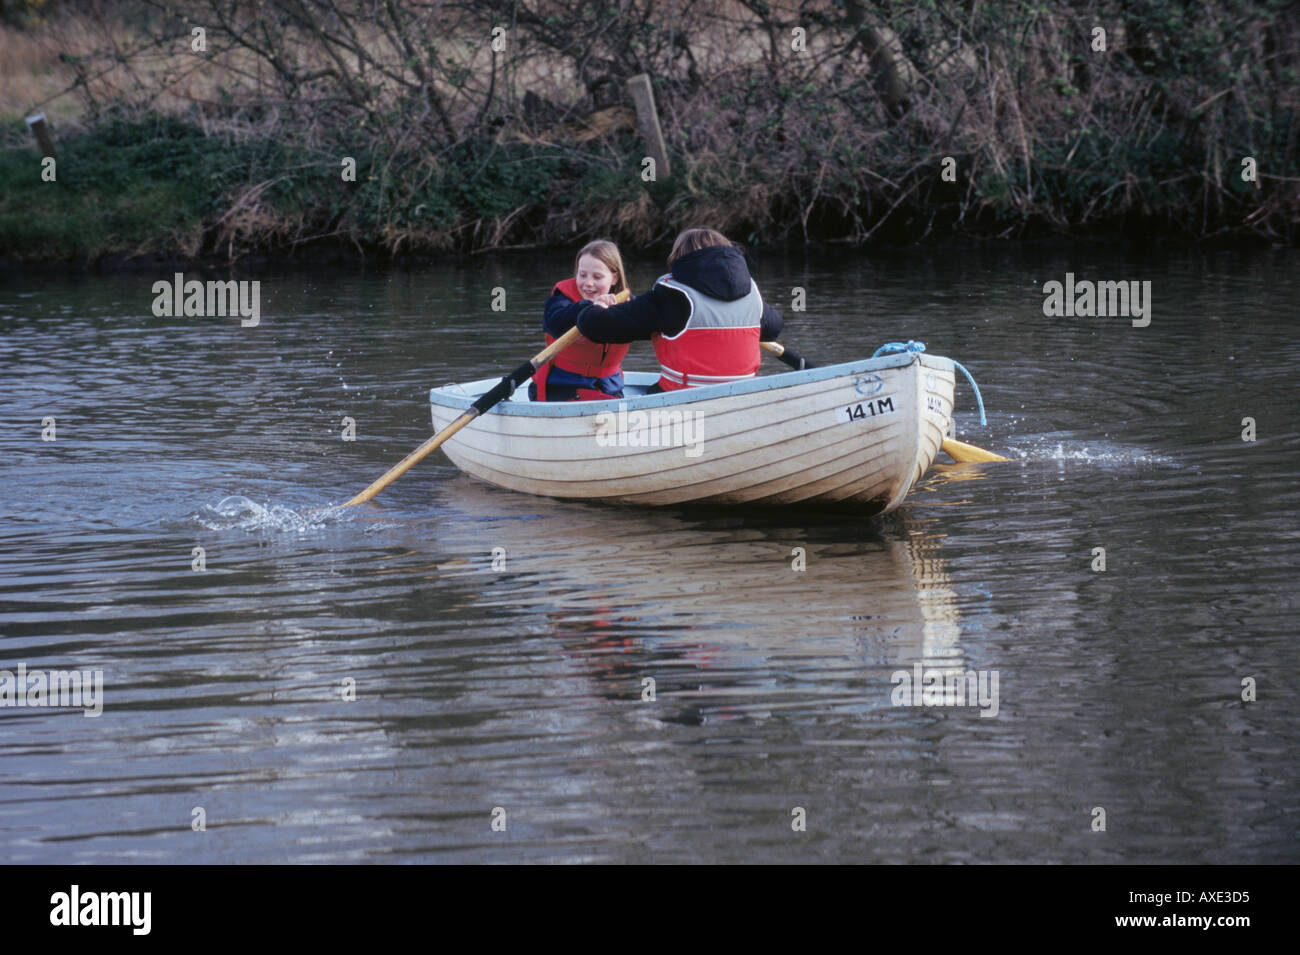 UK NORFOLK BROADS TWO GIRLS IN A ROWING BOAT WITH LIFE JACKETS WATER LAKES HOLIDAY LEISURE FUN SAFETY Stock Photo